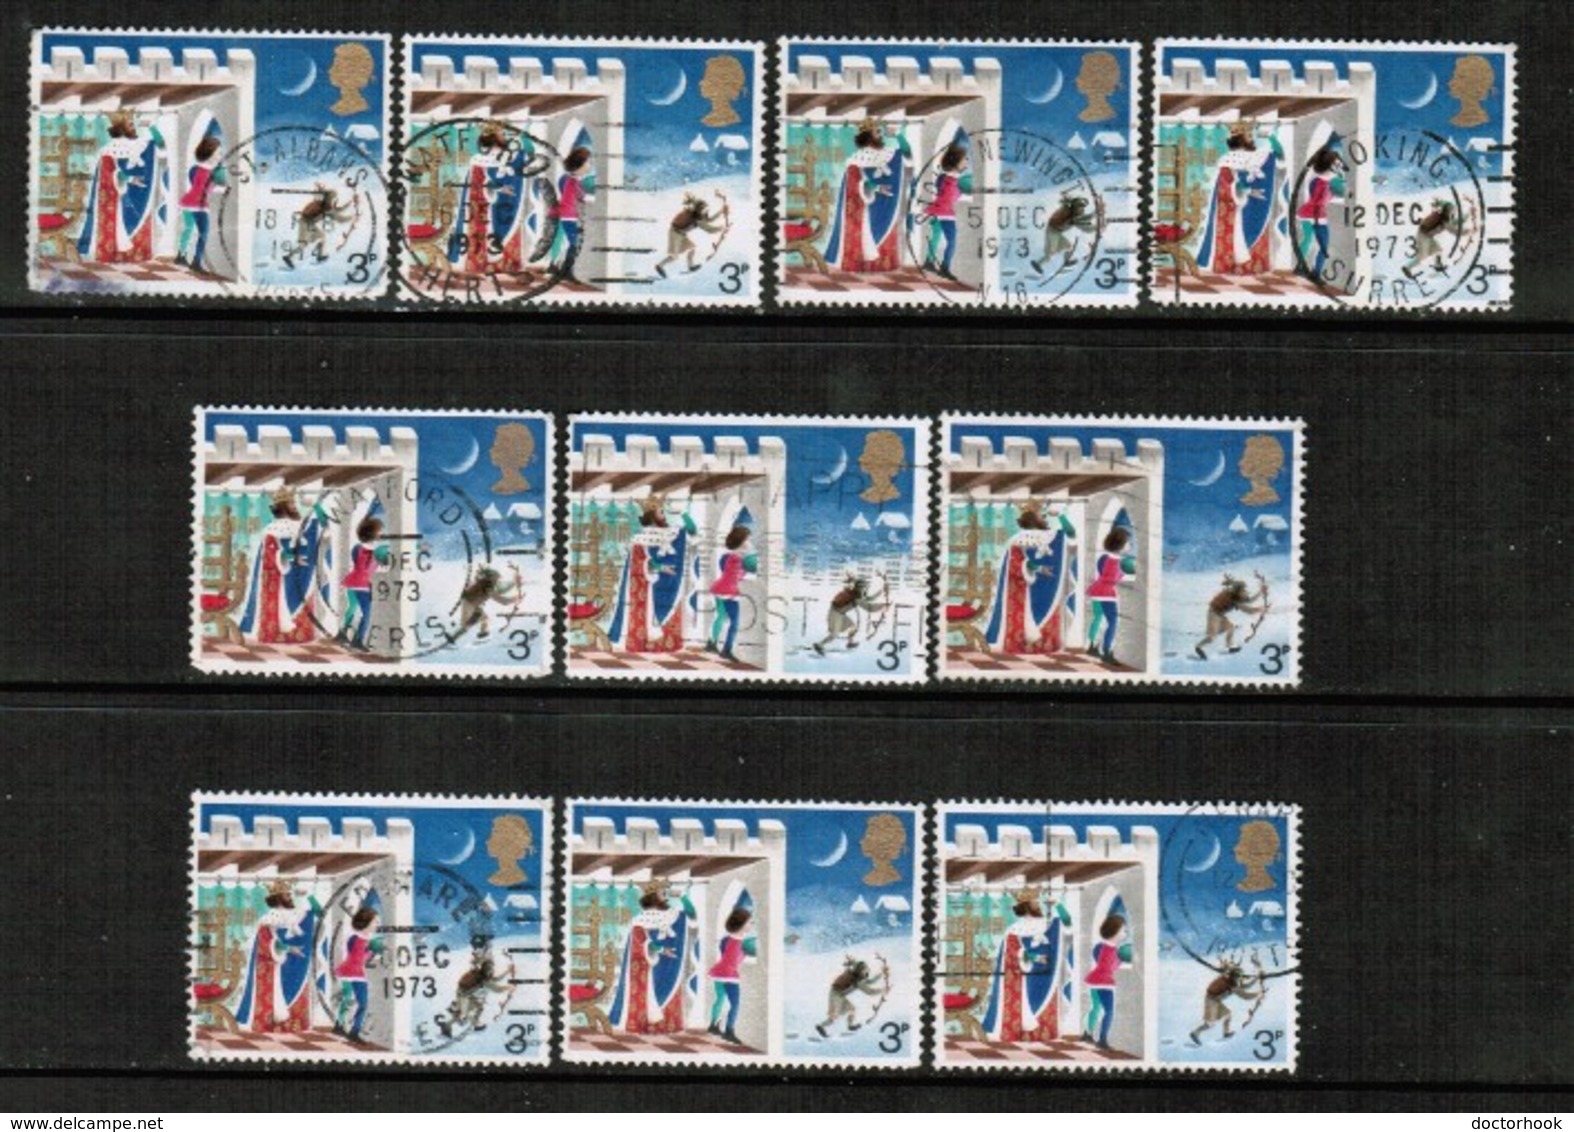 GREAT BRITAIN  Scott # 710 USED WHOLESALE LOT OF 10 (WH-400) - Lots & Kiloware (mixtures) - Max. 999 Stamps